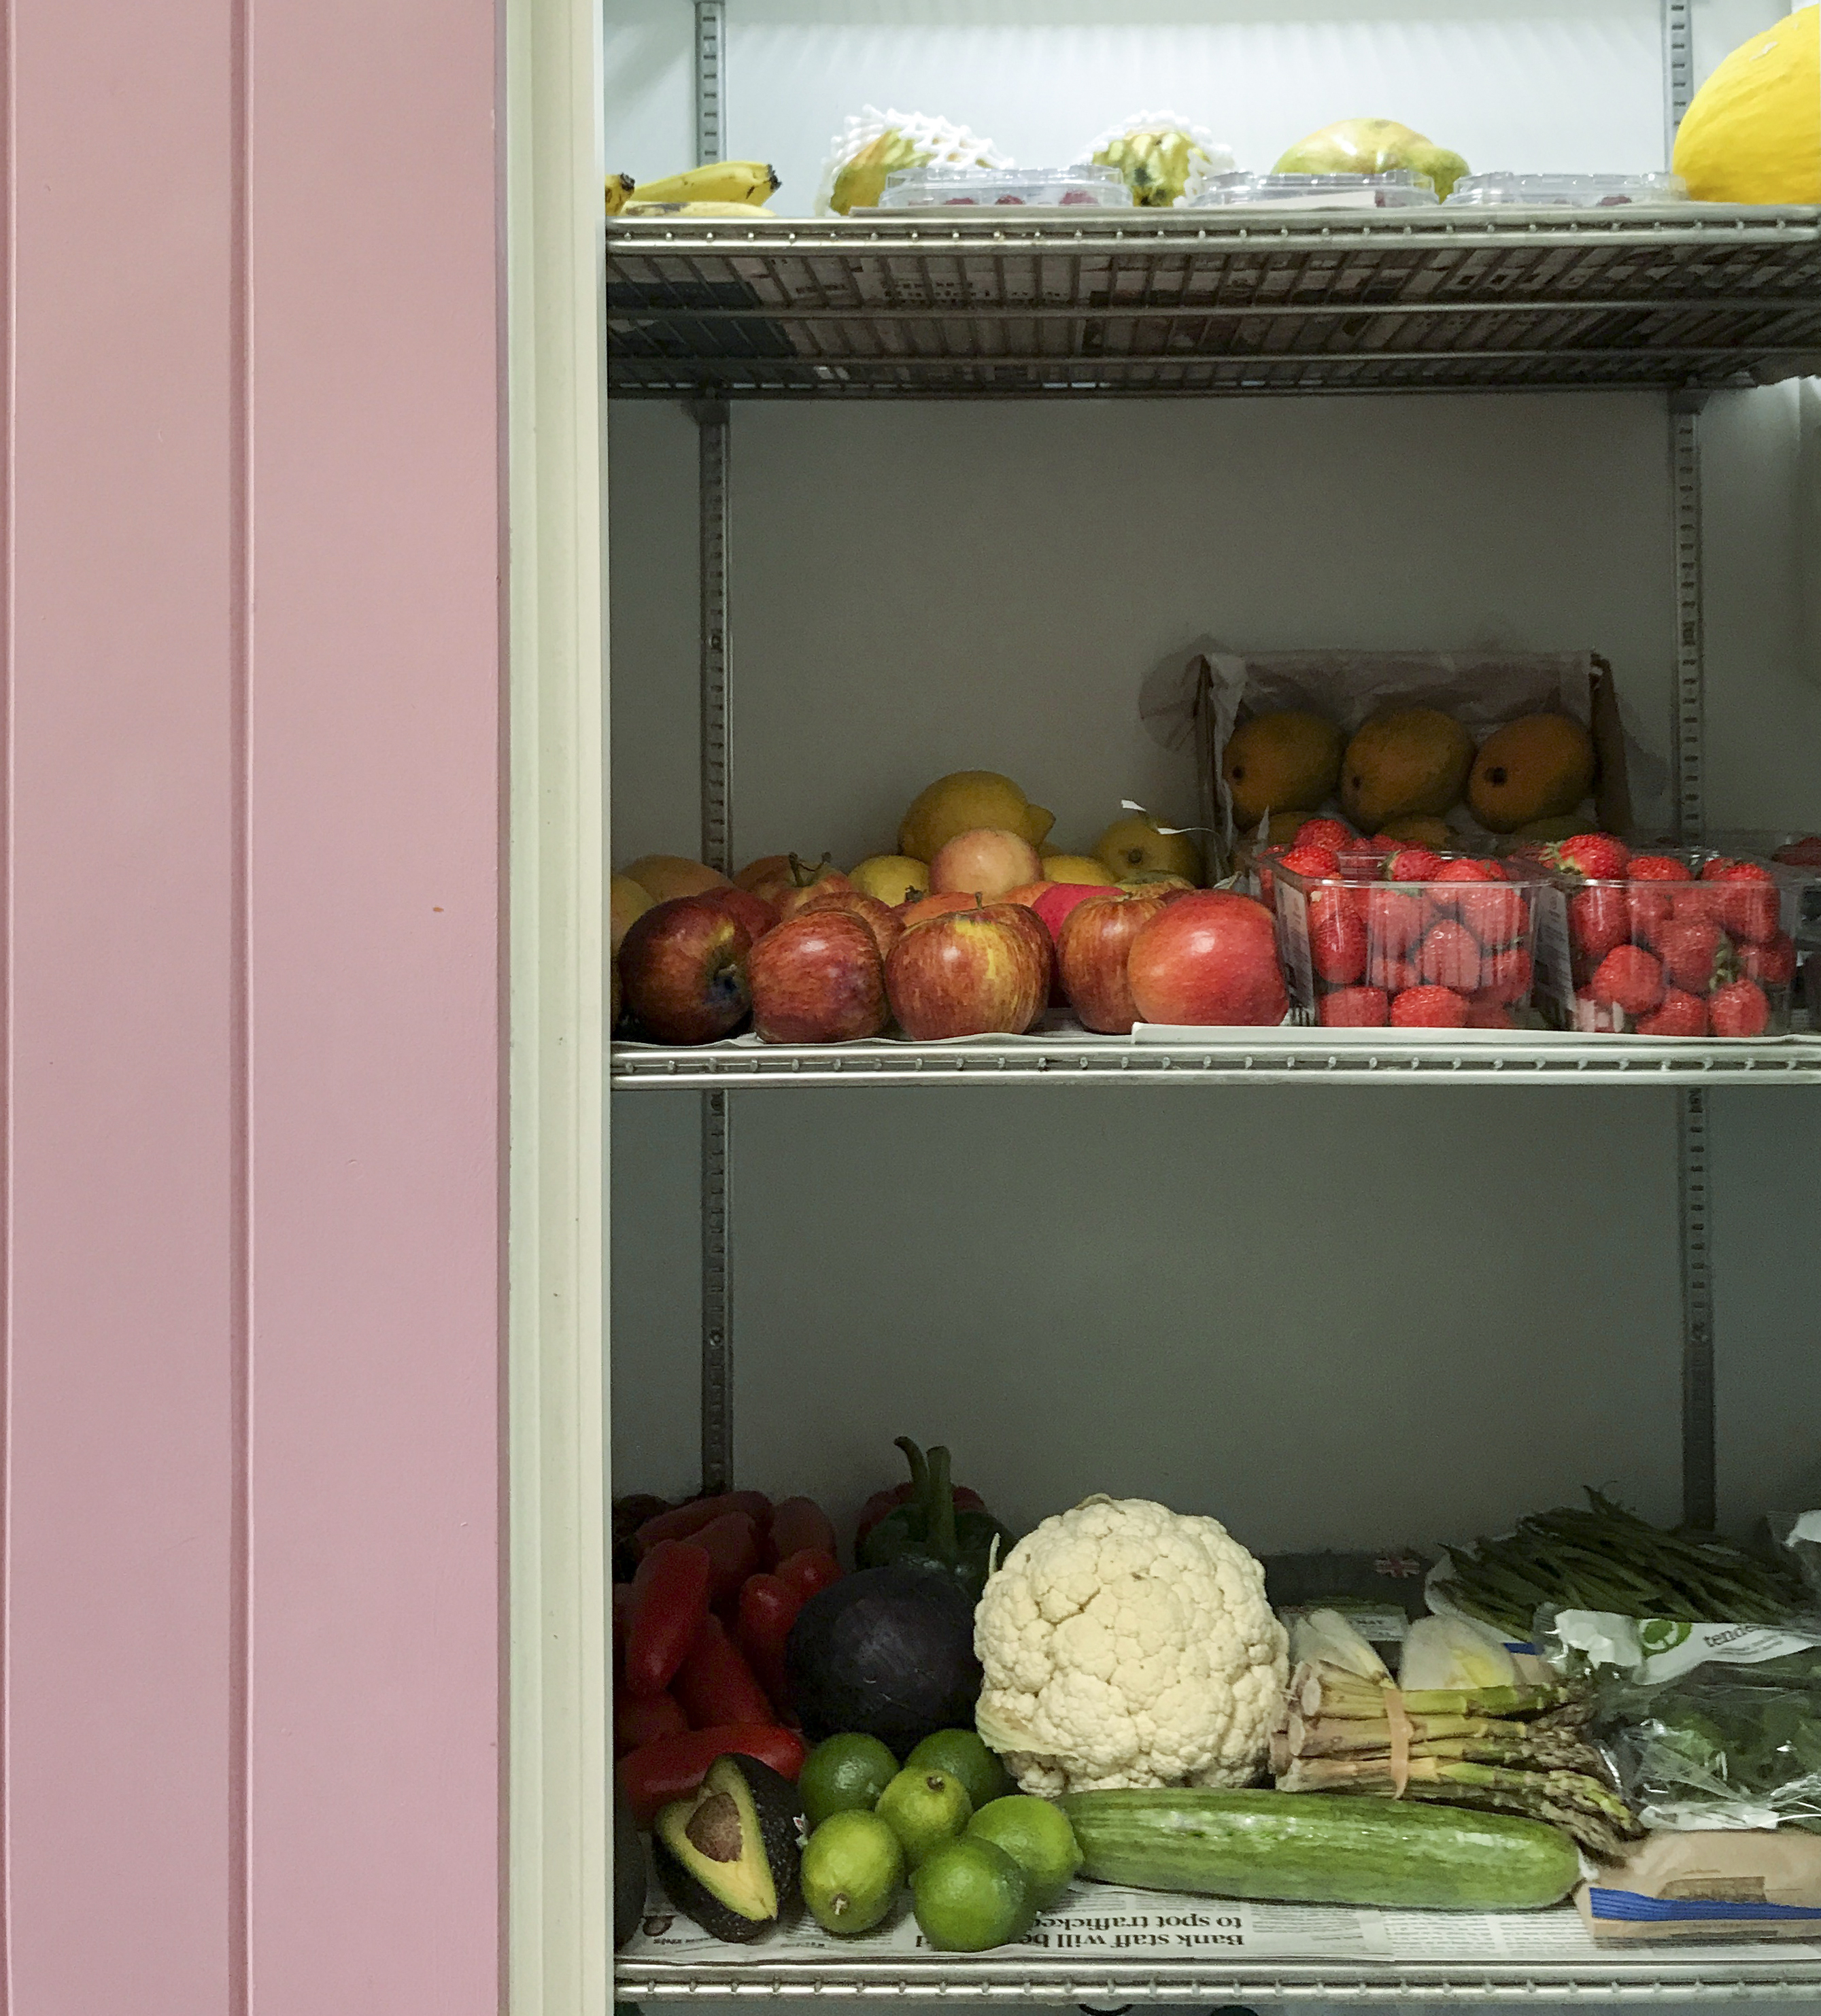 Refridgerator with fruits and vegetables